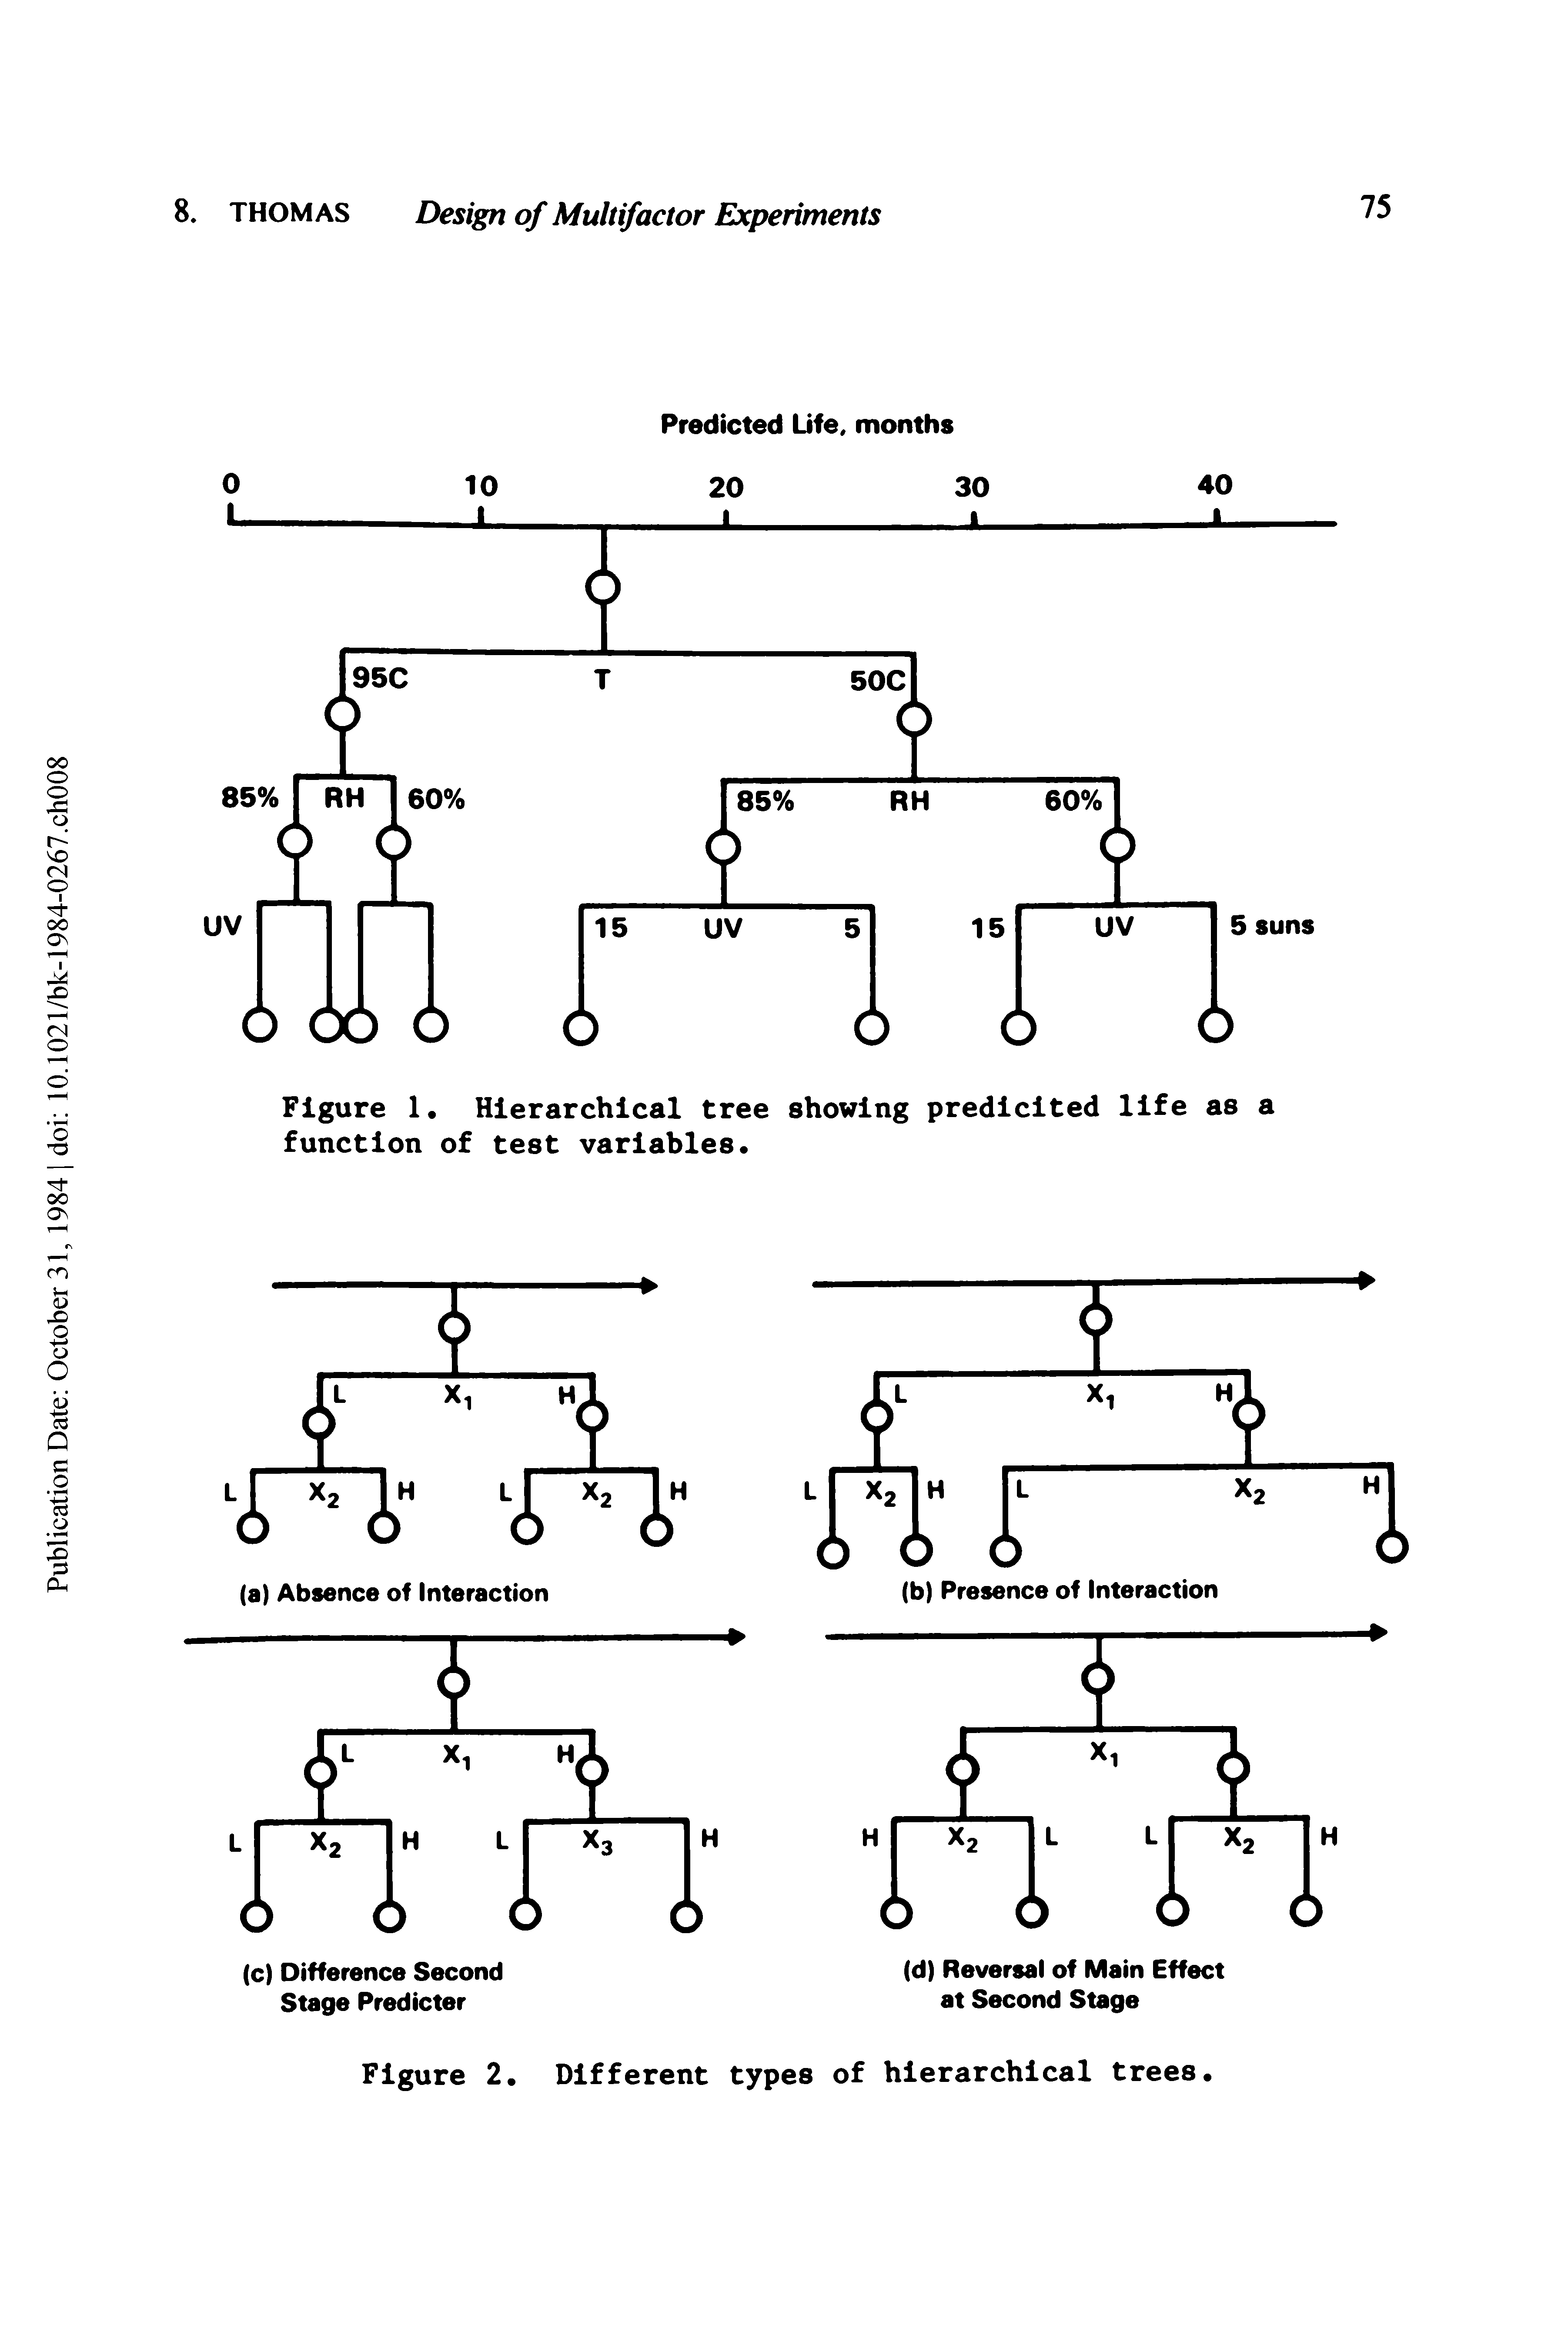 Figure 1. Hierarchical tree showing predicited life as a function of test variables.